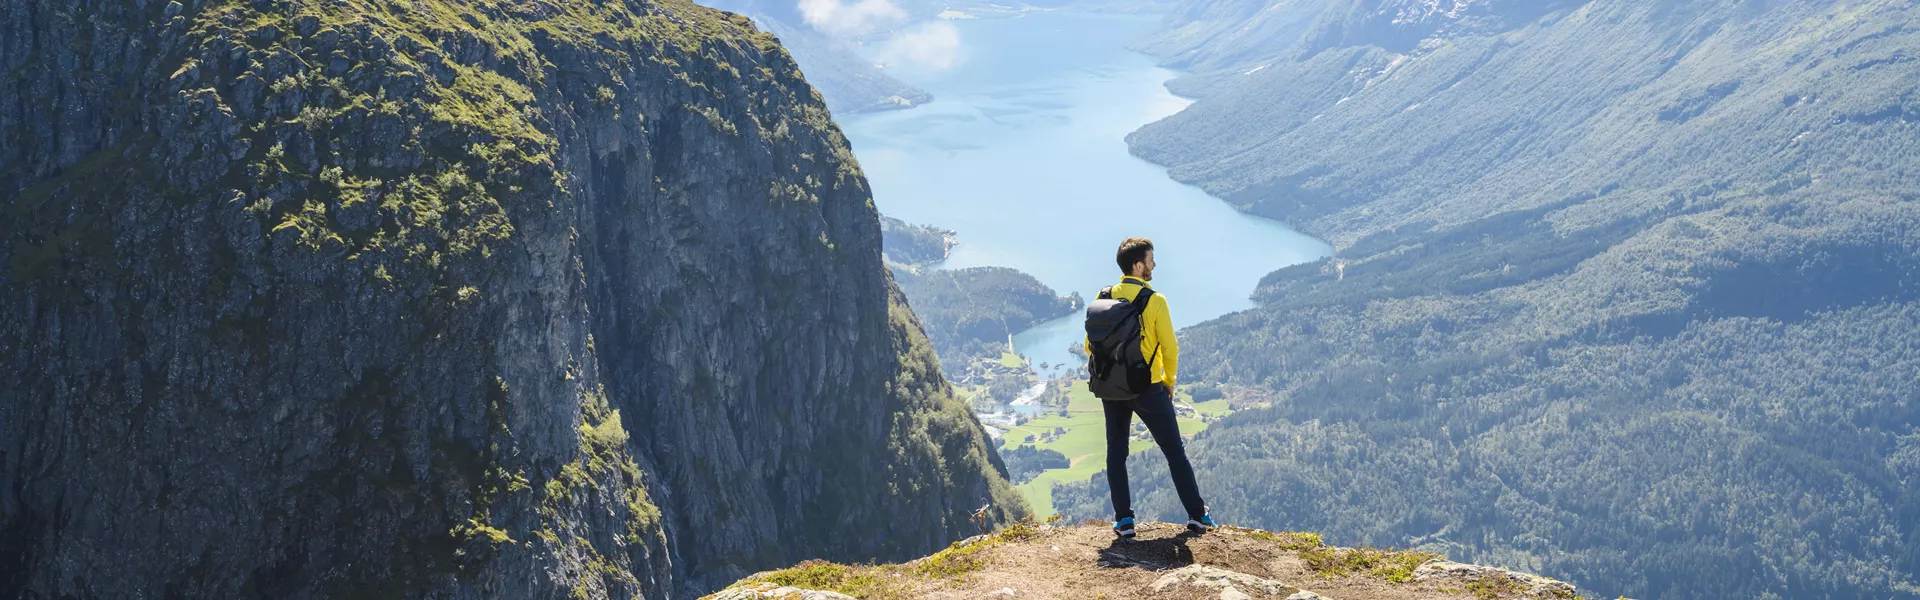 Tourist admiring the view from the top of a mountain in Loen, Norway